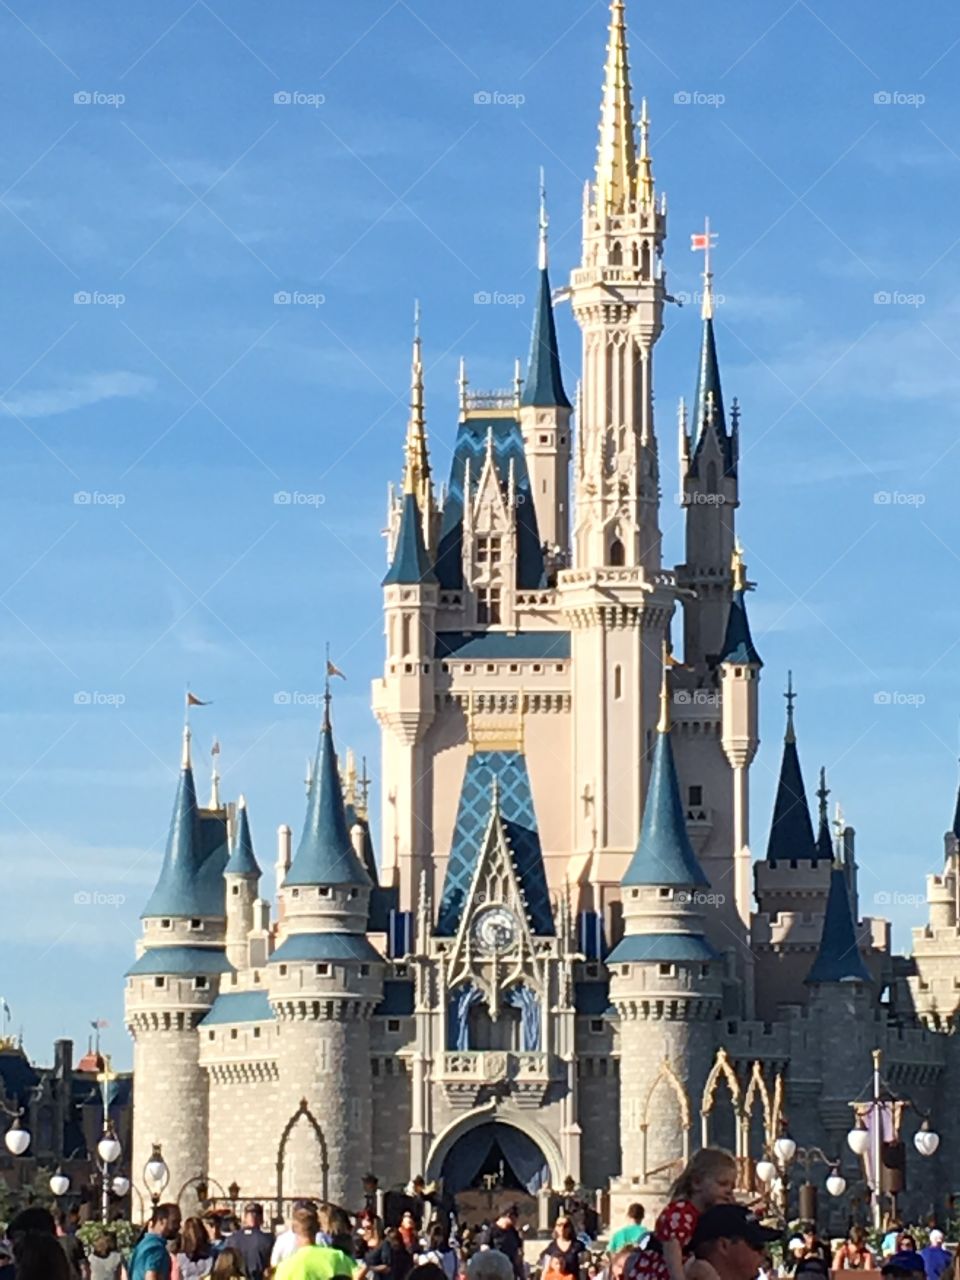 Cinderella’s Castle in Disney World on a beautiful day 